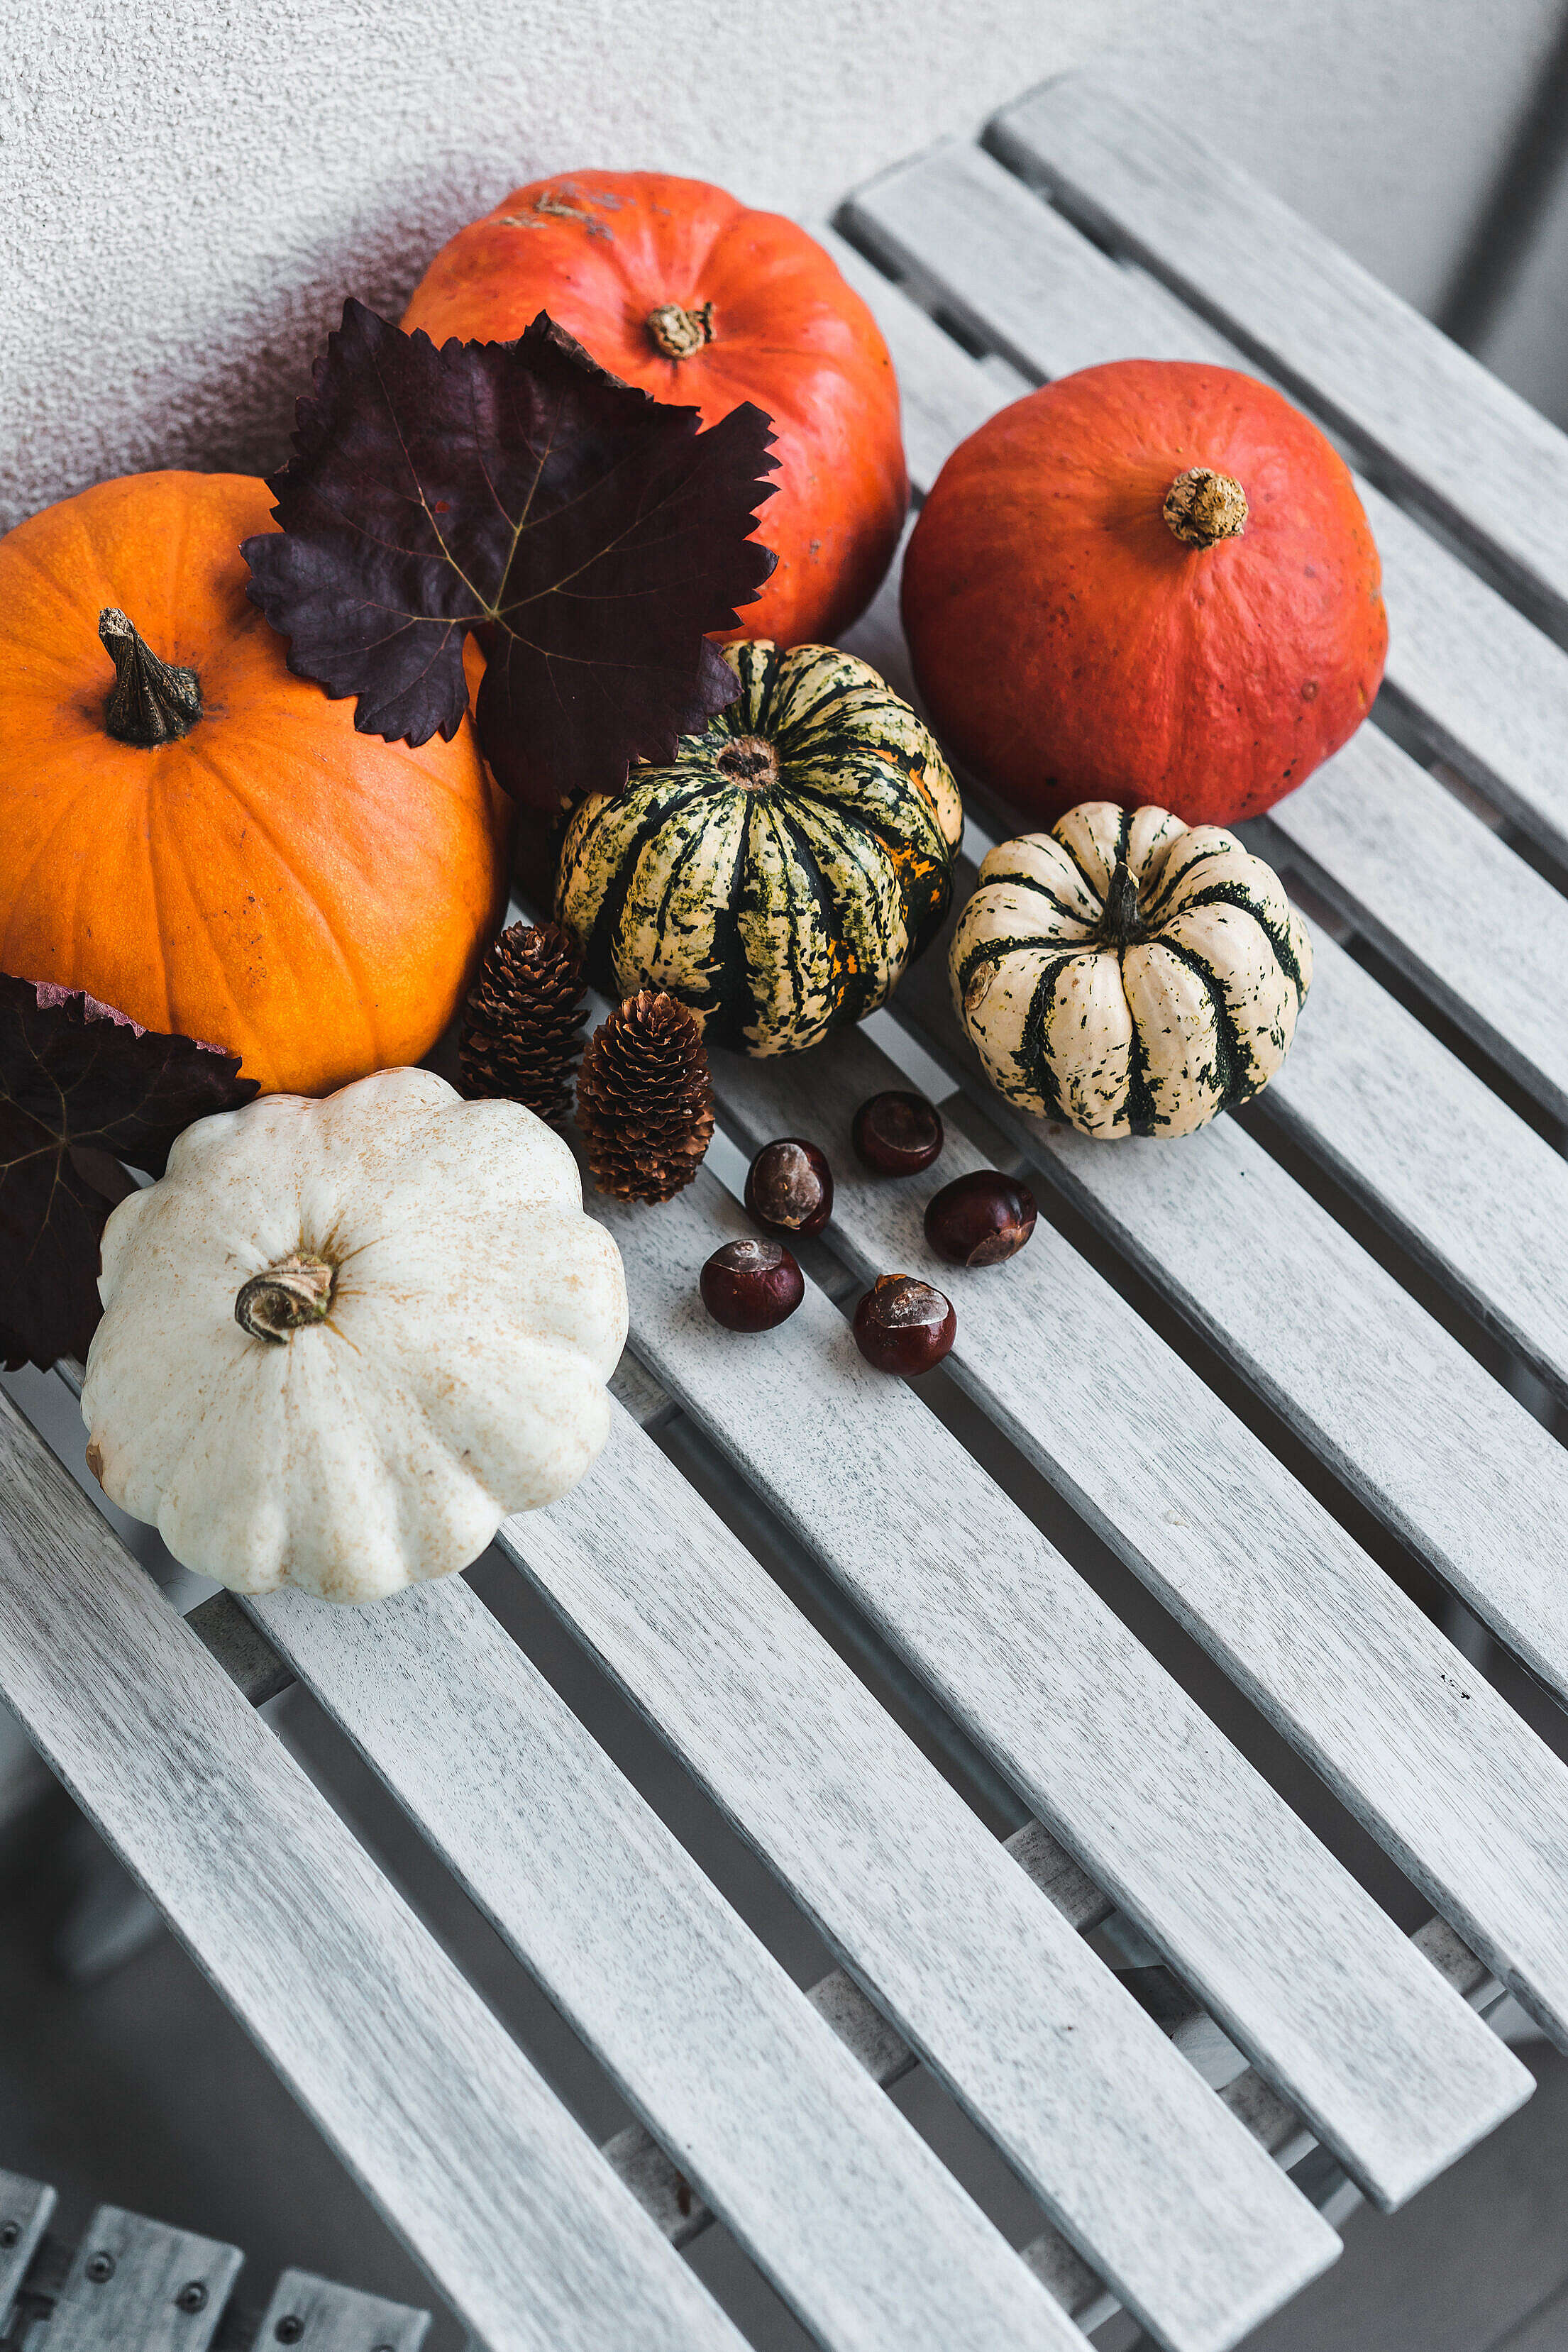 Mixed Pumpkins with Autumn Decorations Free Stock Photo